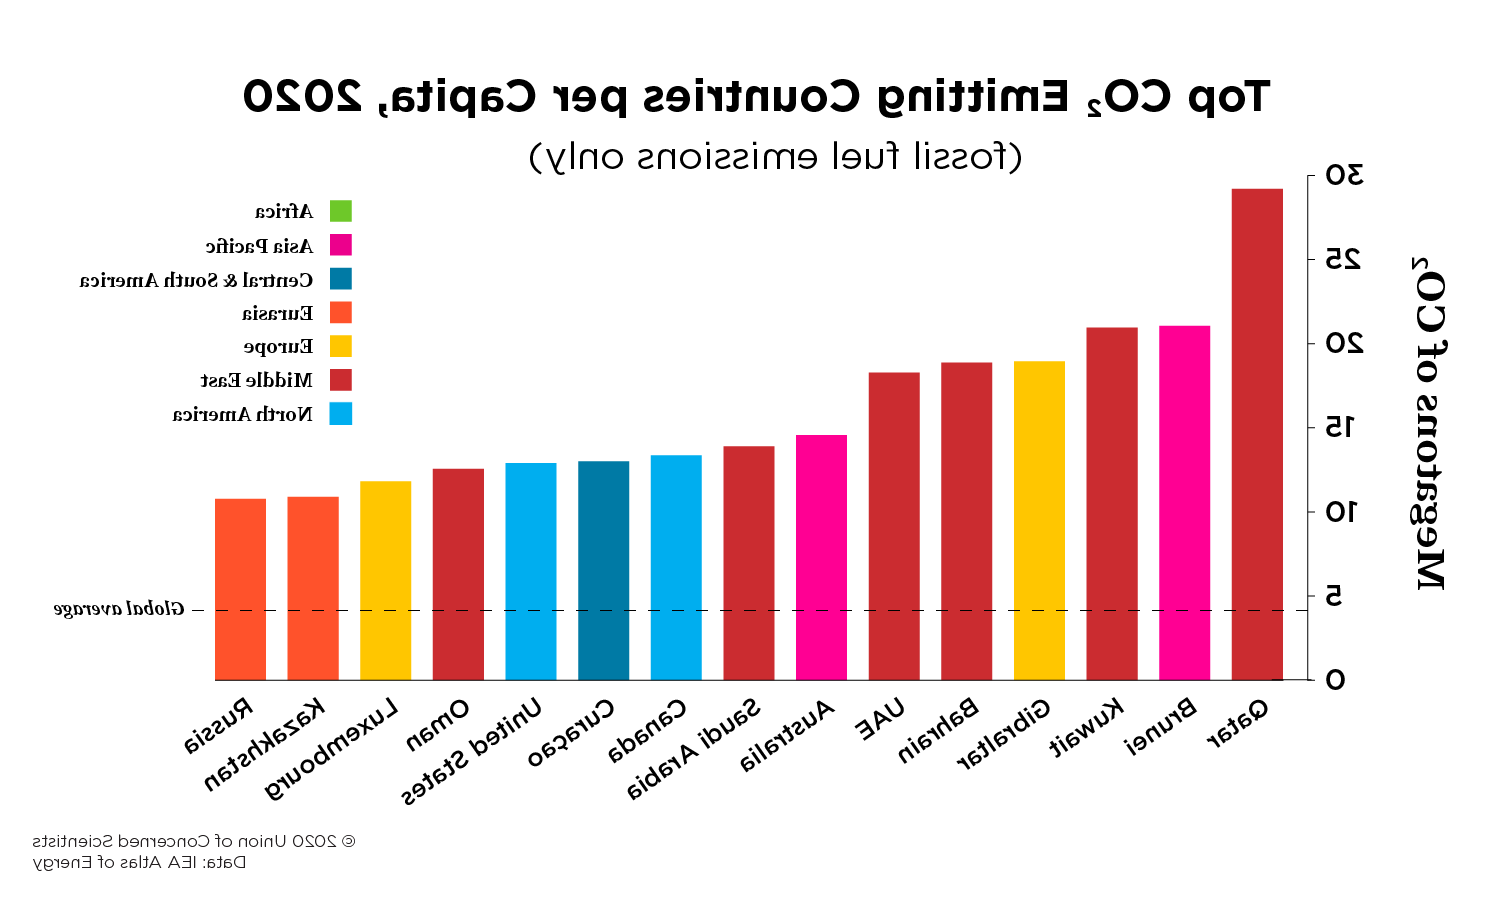 A bar graph of the top CO2 emitting countries per capita in 2020.